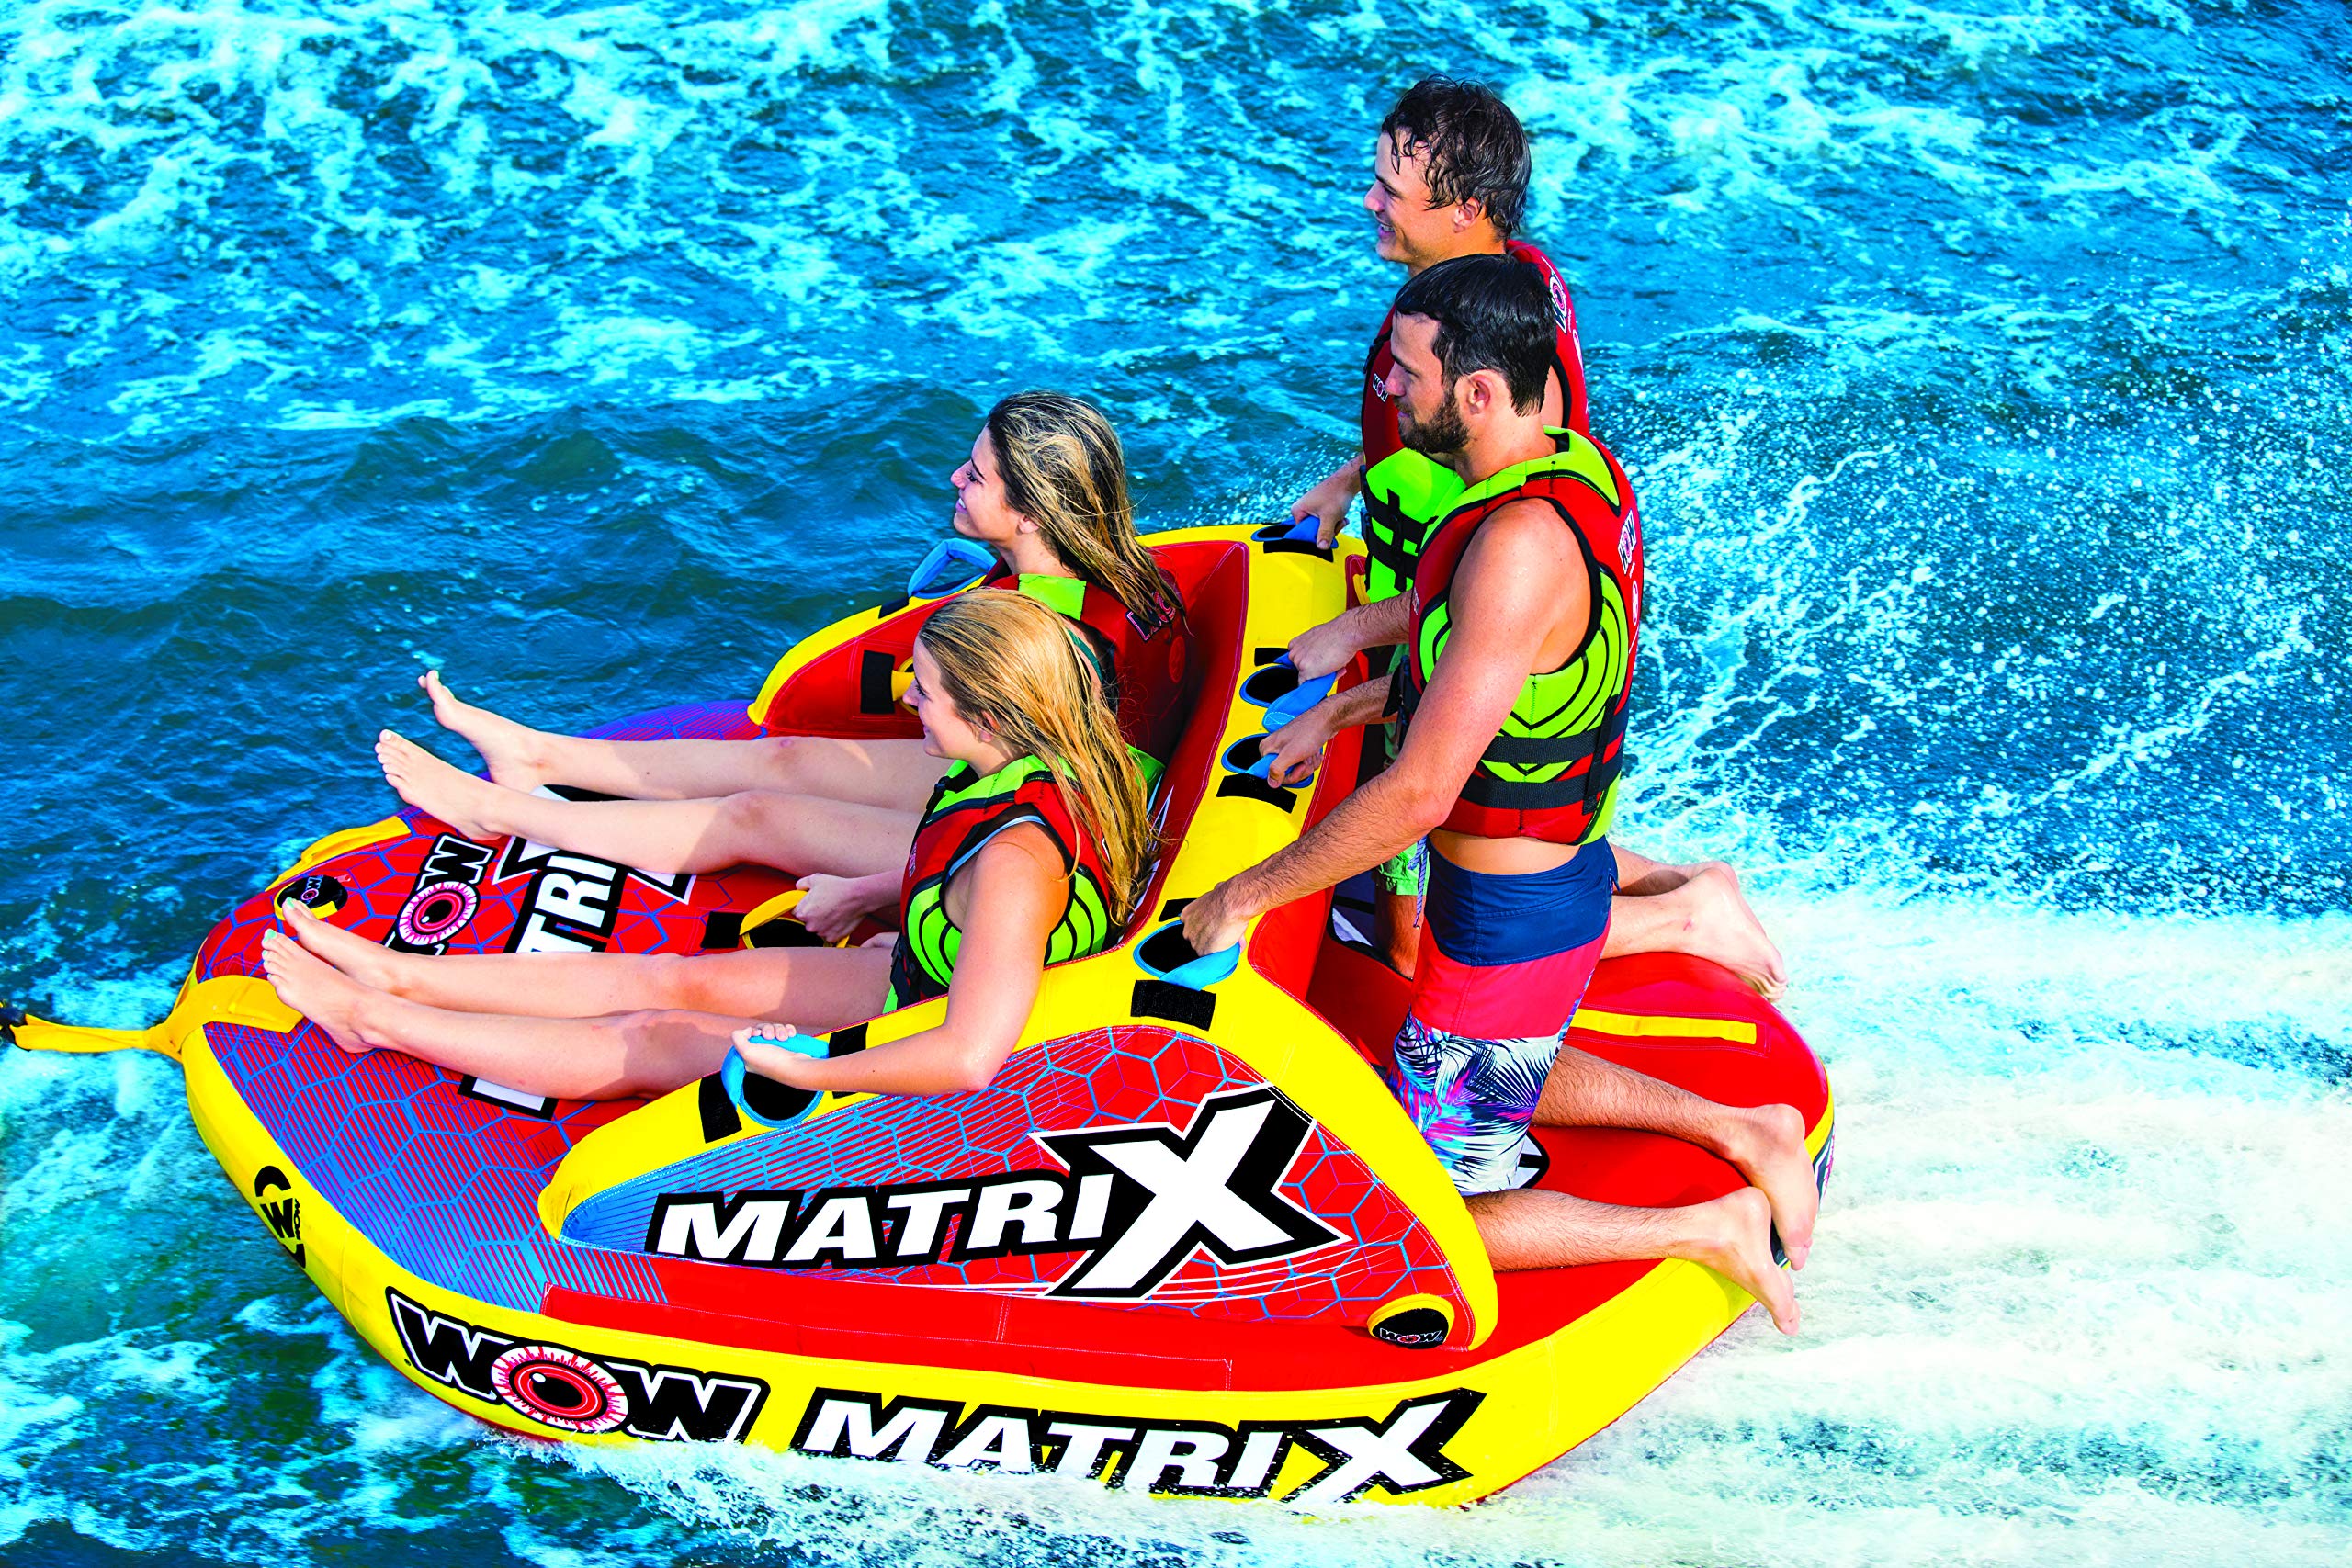 WOW World of Watersports Towable Matrix 1 2 3 or 4 Person Inflatable Towable Deck Tube for Boating, 20-1060